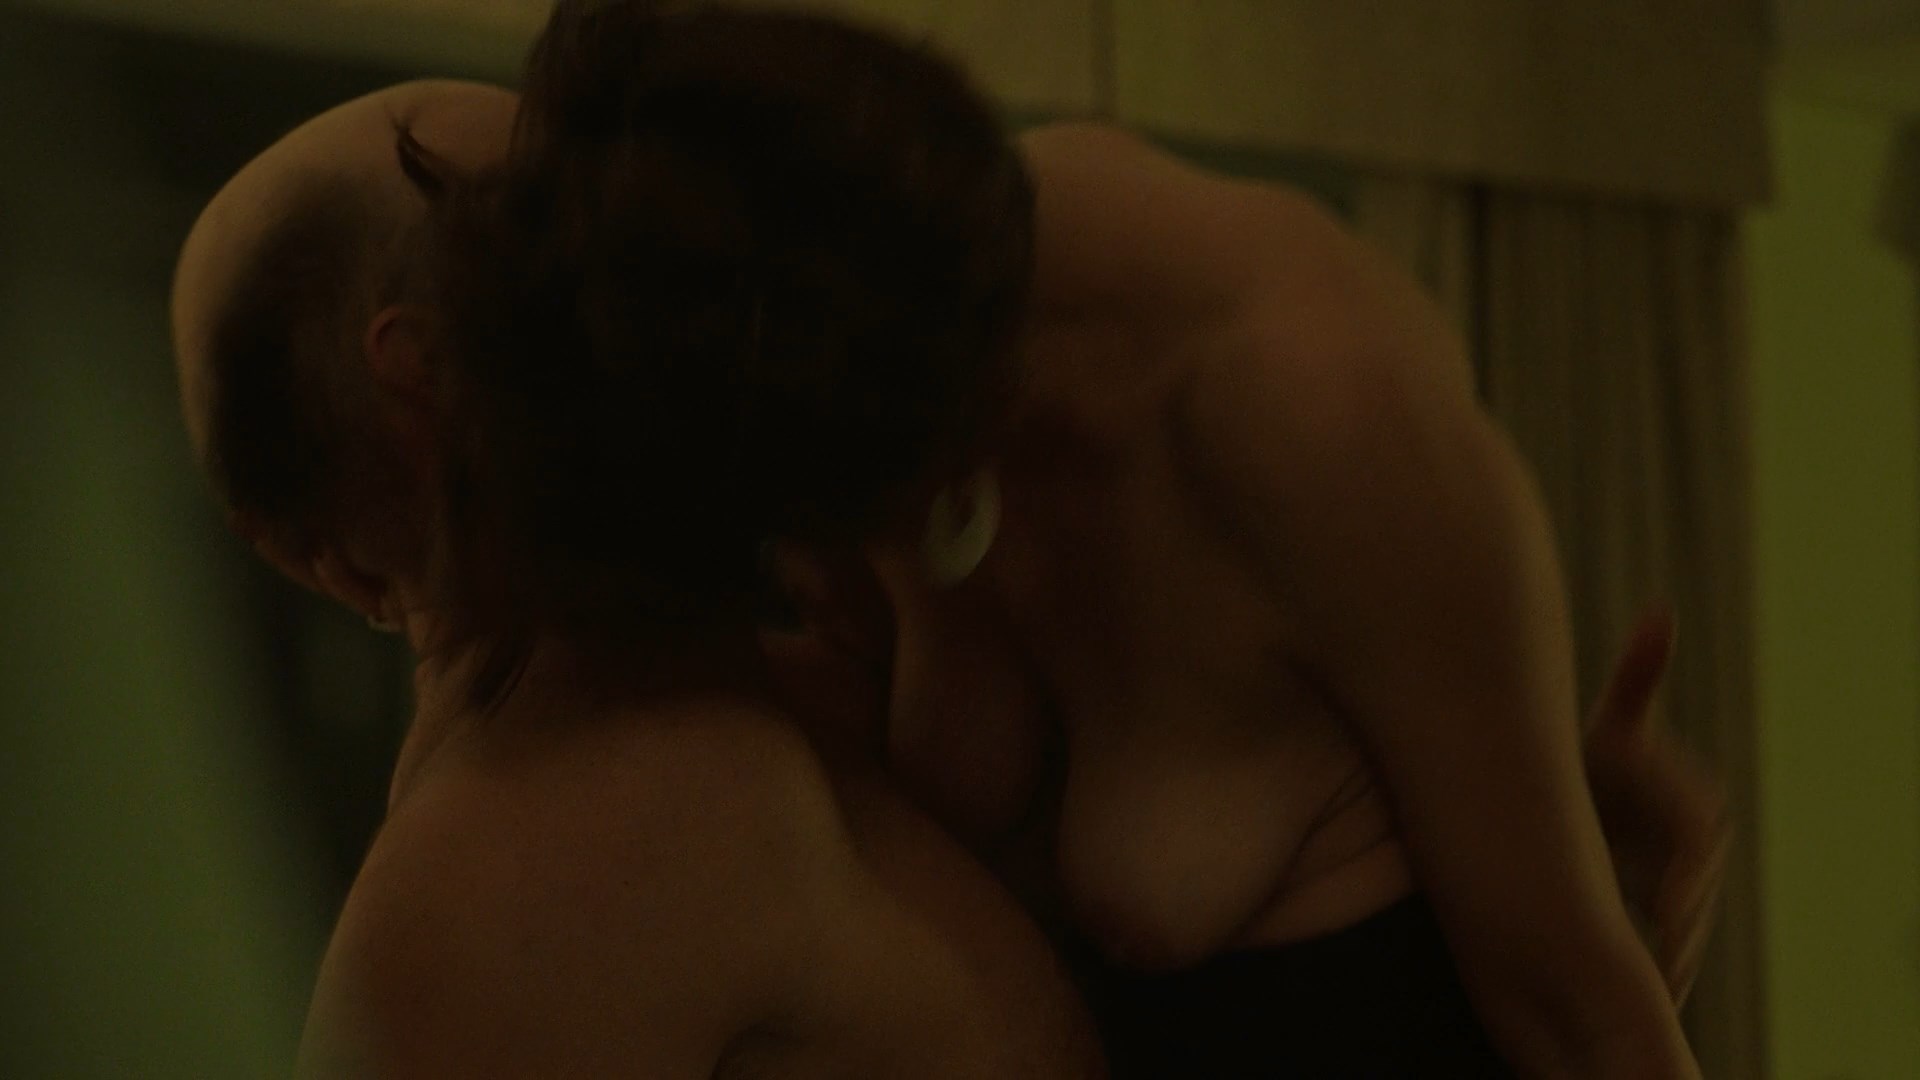 Continue of previous scene where Maggie Gyllenhaal is having sex with some ...